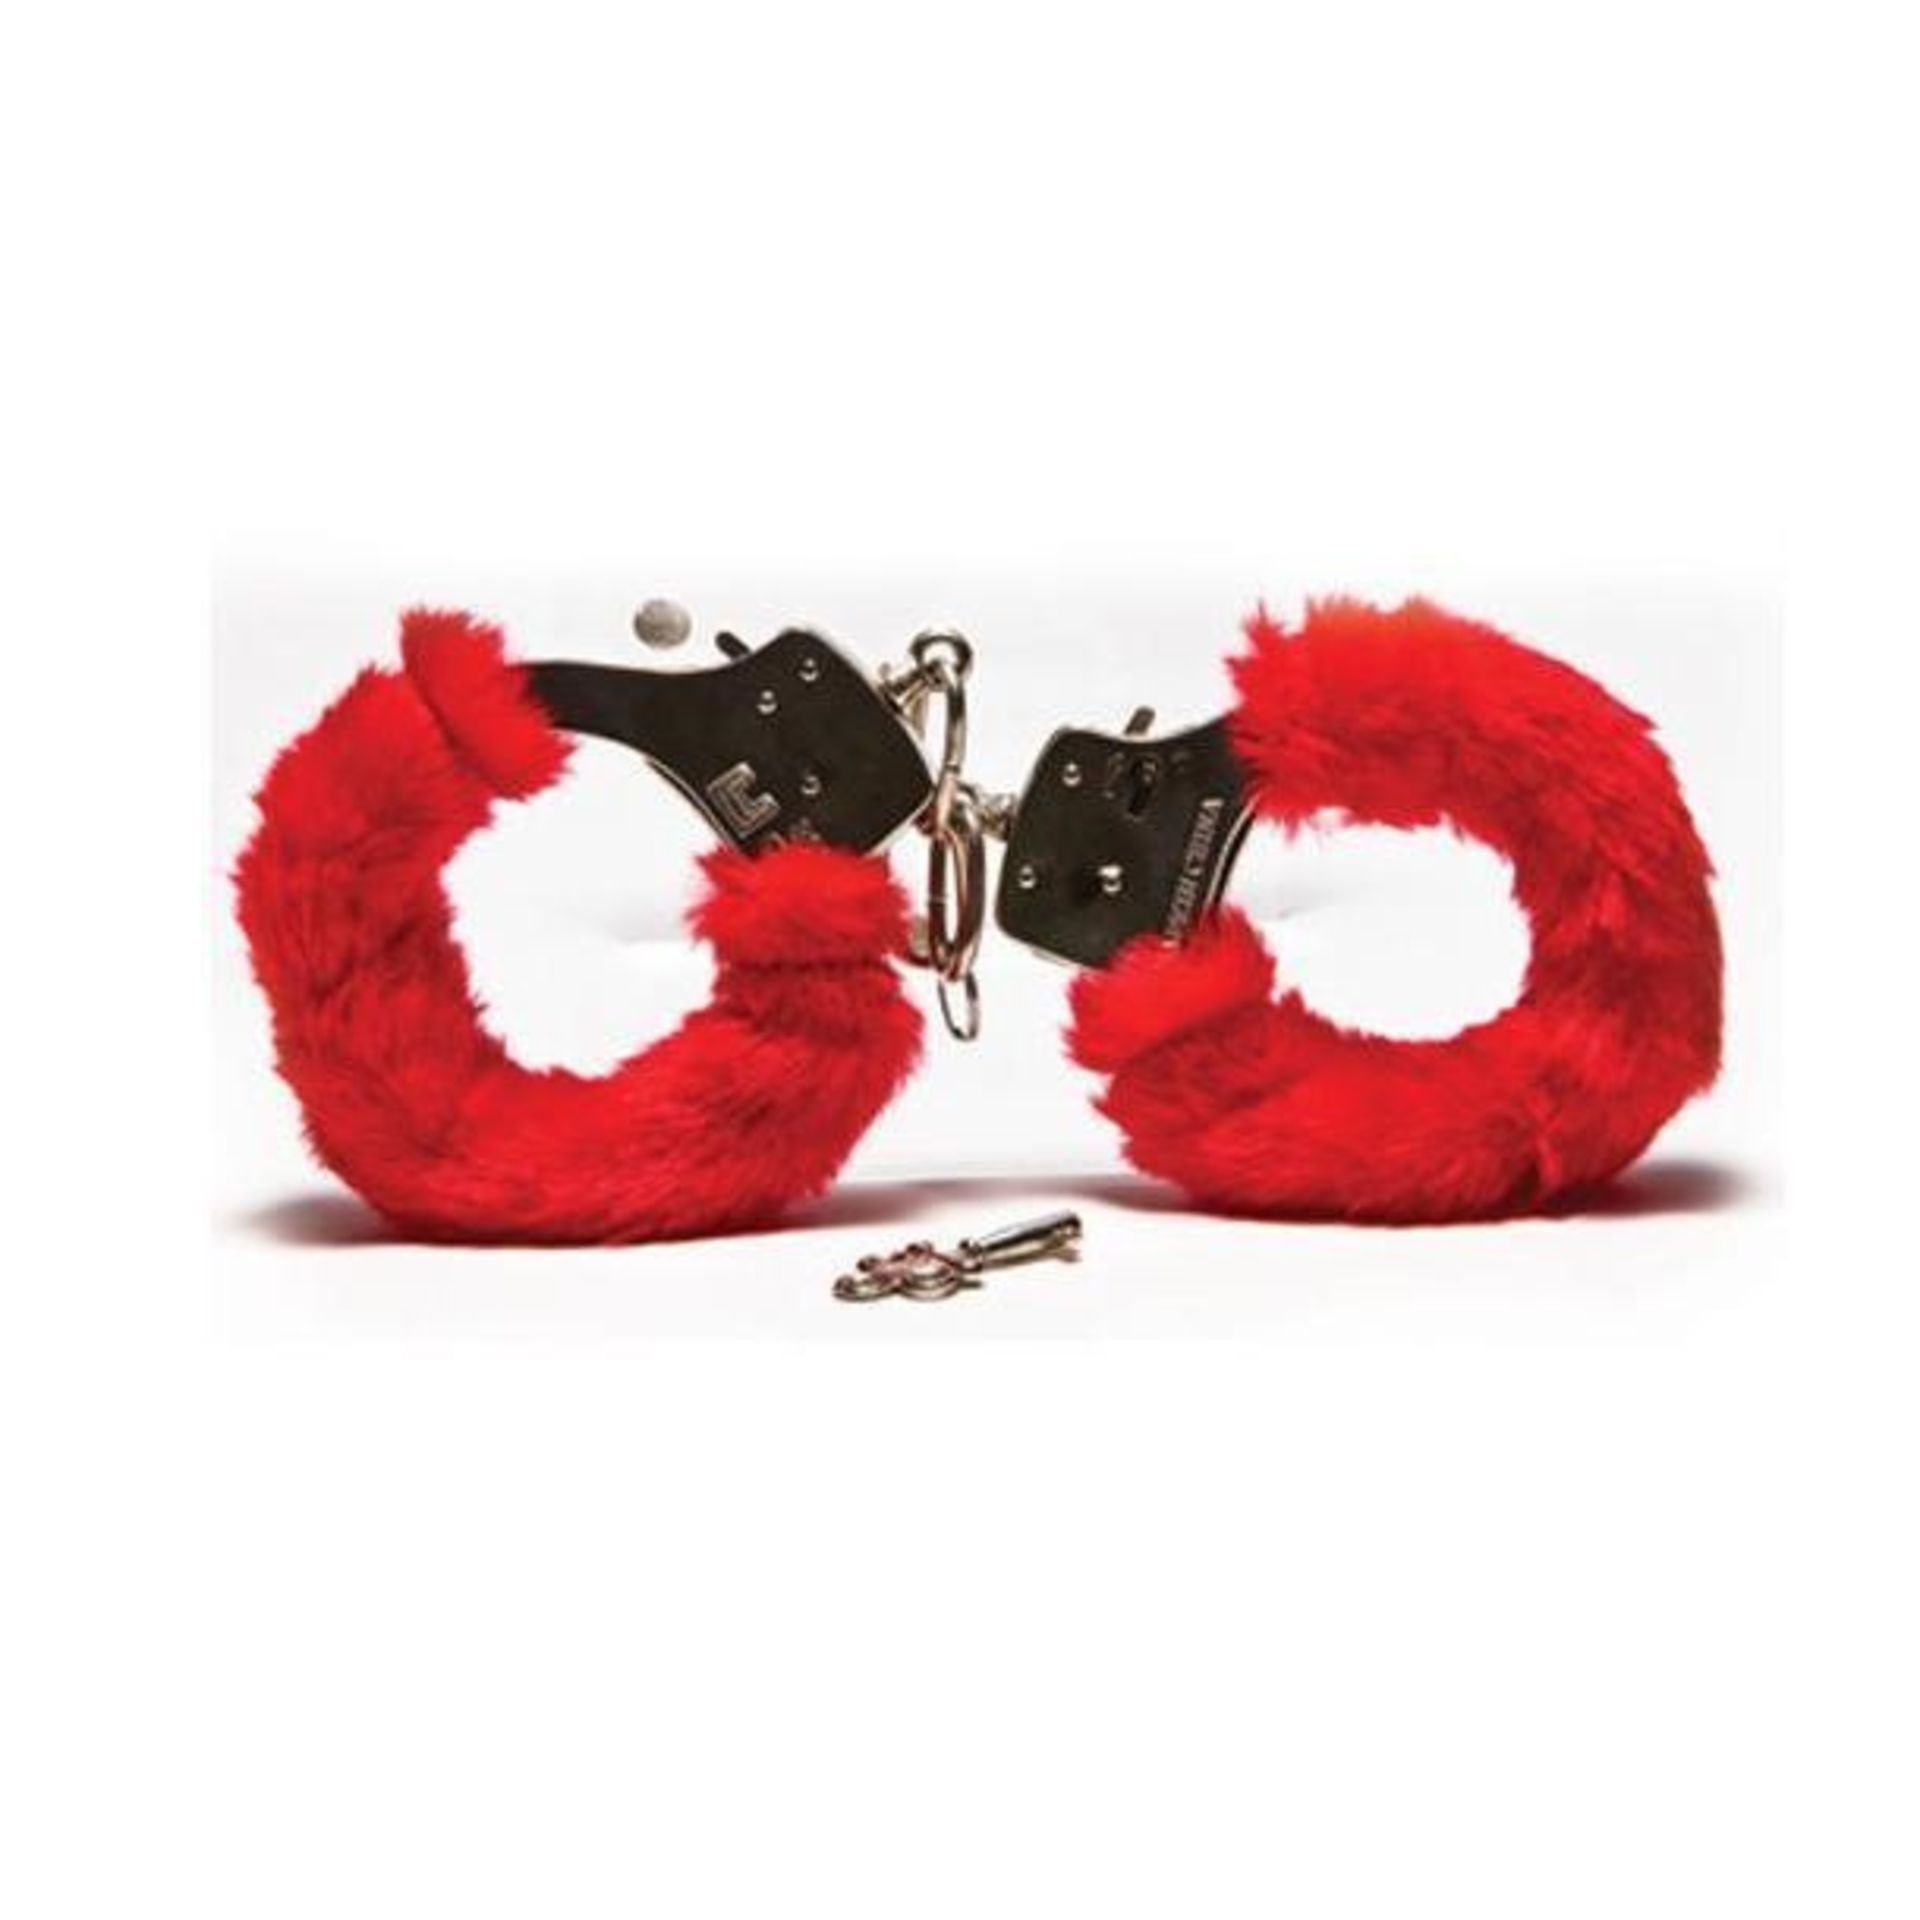 1 AS NEW RED FURRY LOVE HANDCUFFS / RRP £8.99 (CONFIDENTIAL DELIVERY AVAILABLE)